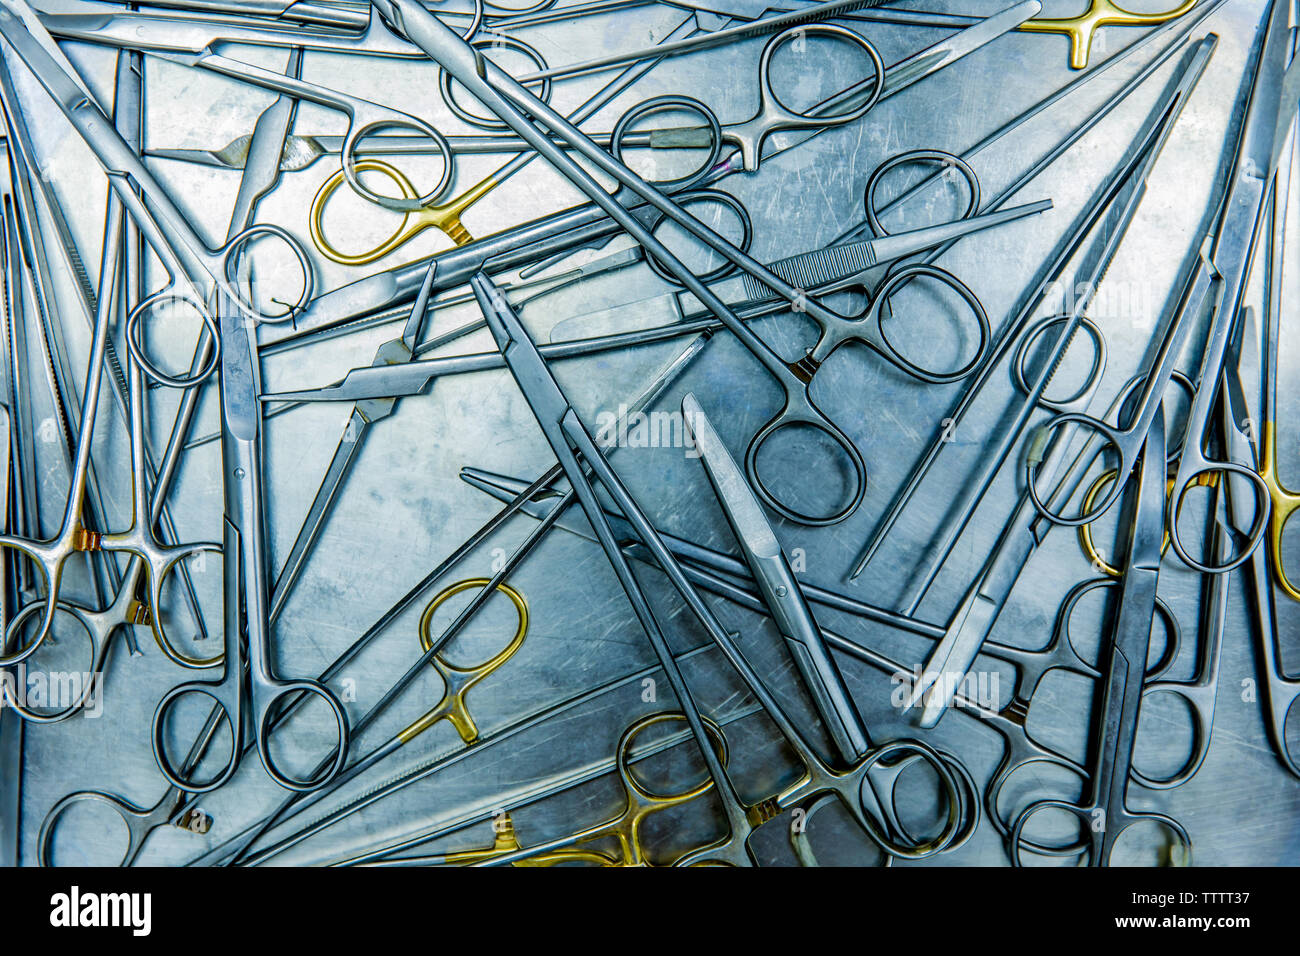 Surgical instruments black and white close-up Stock Photo